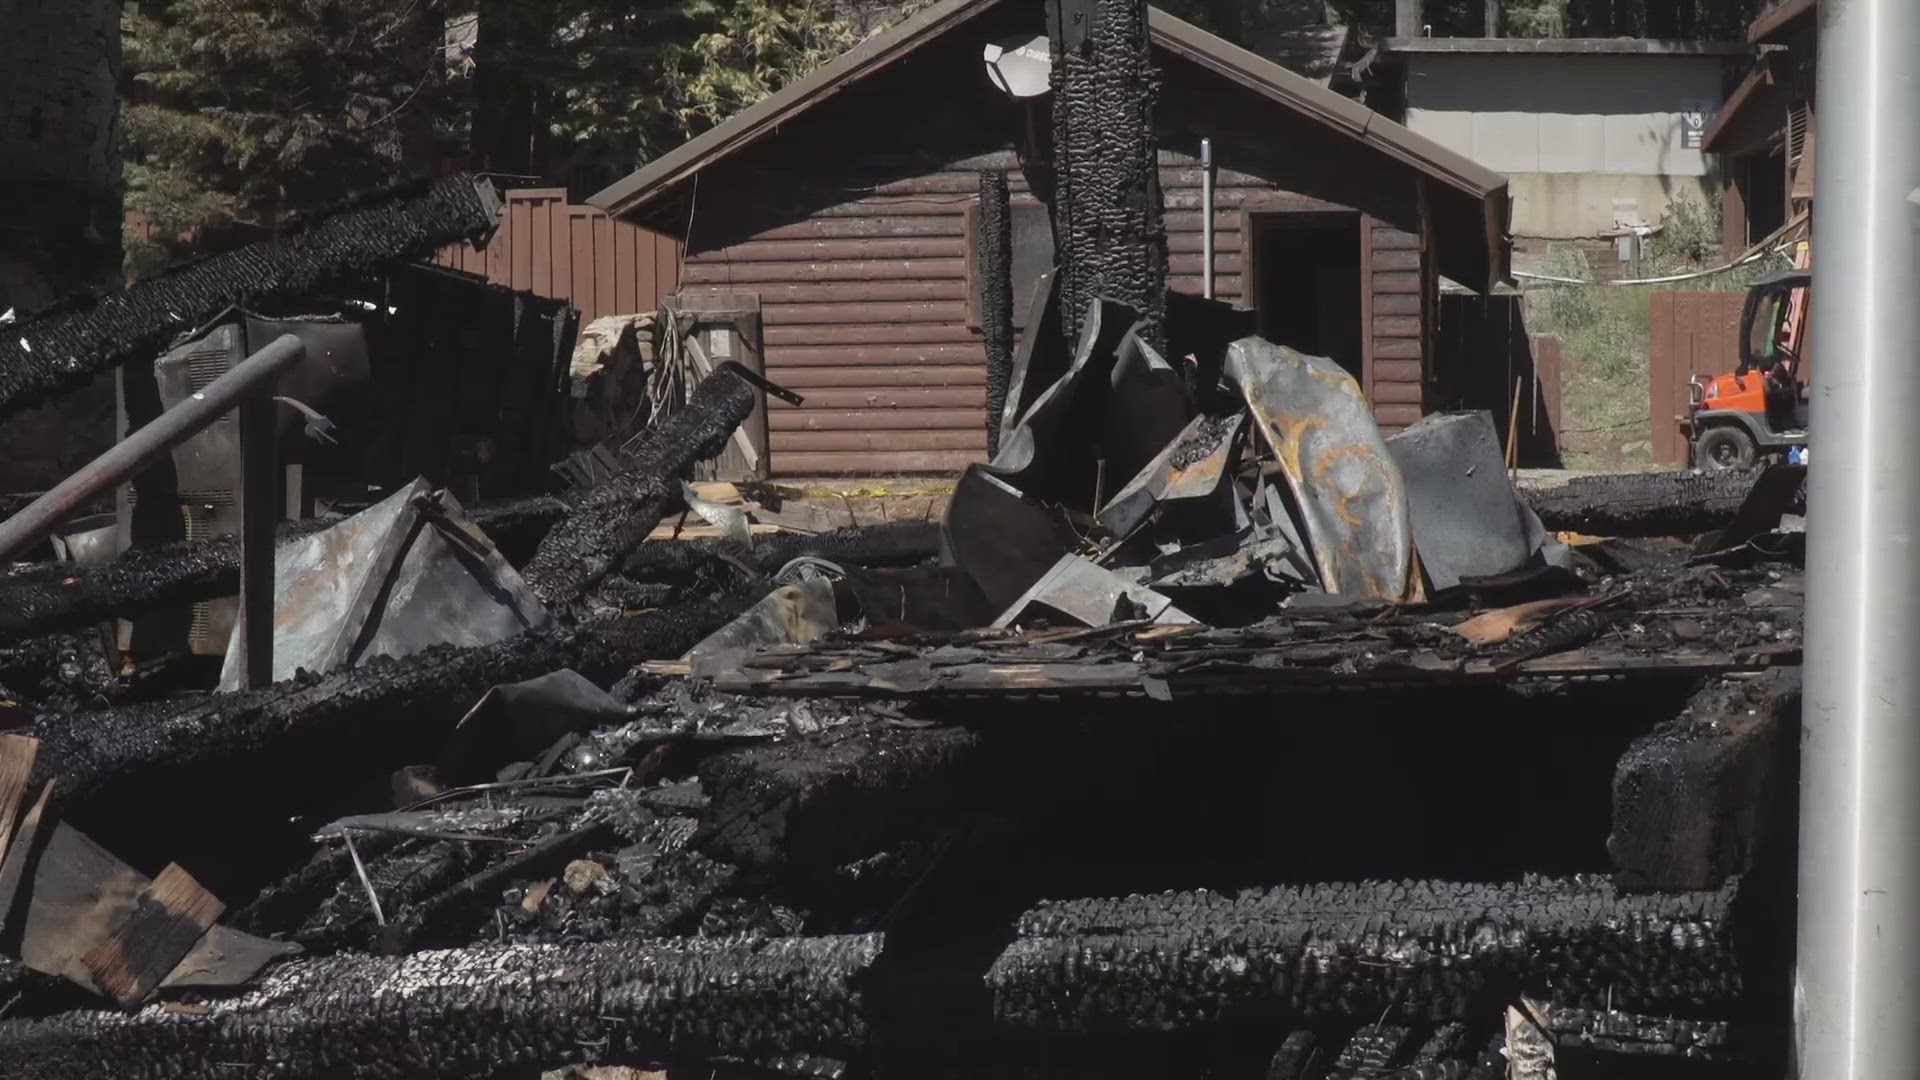 Fire destroys lodge at Bear River Lake Resort in Amador County